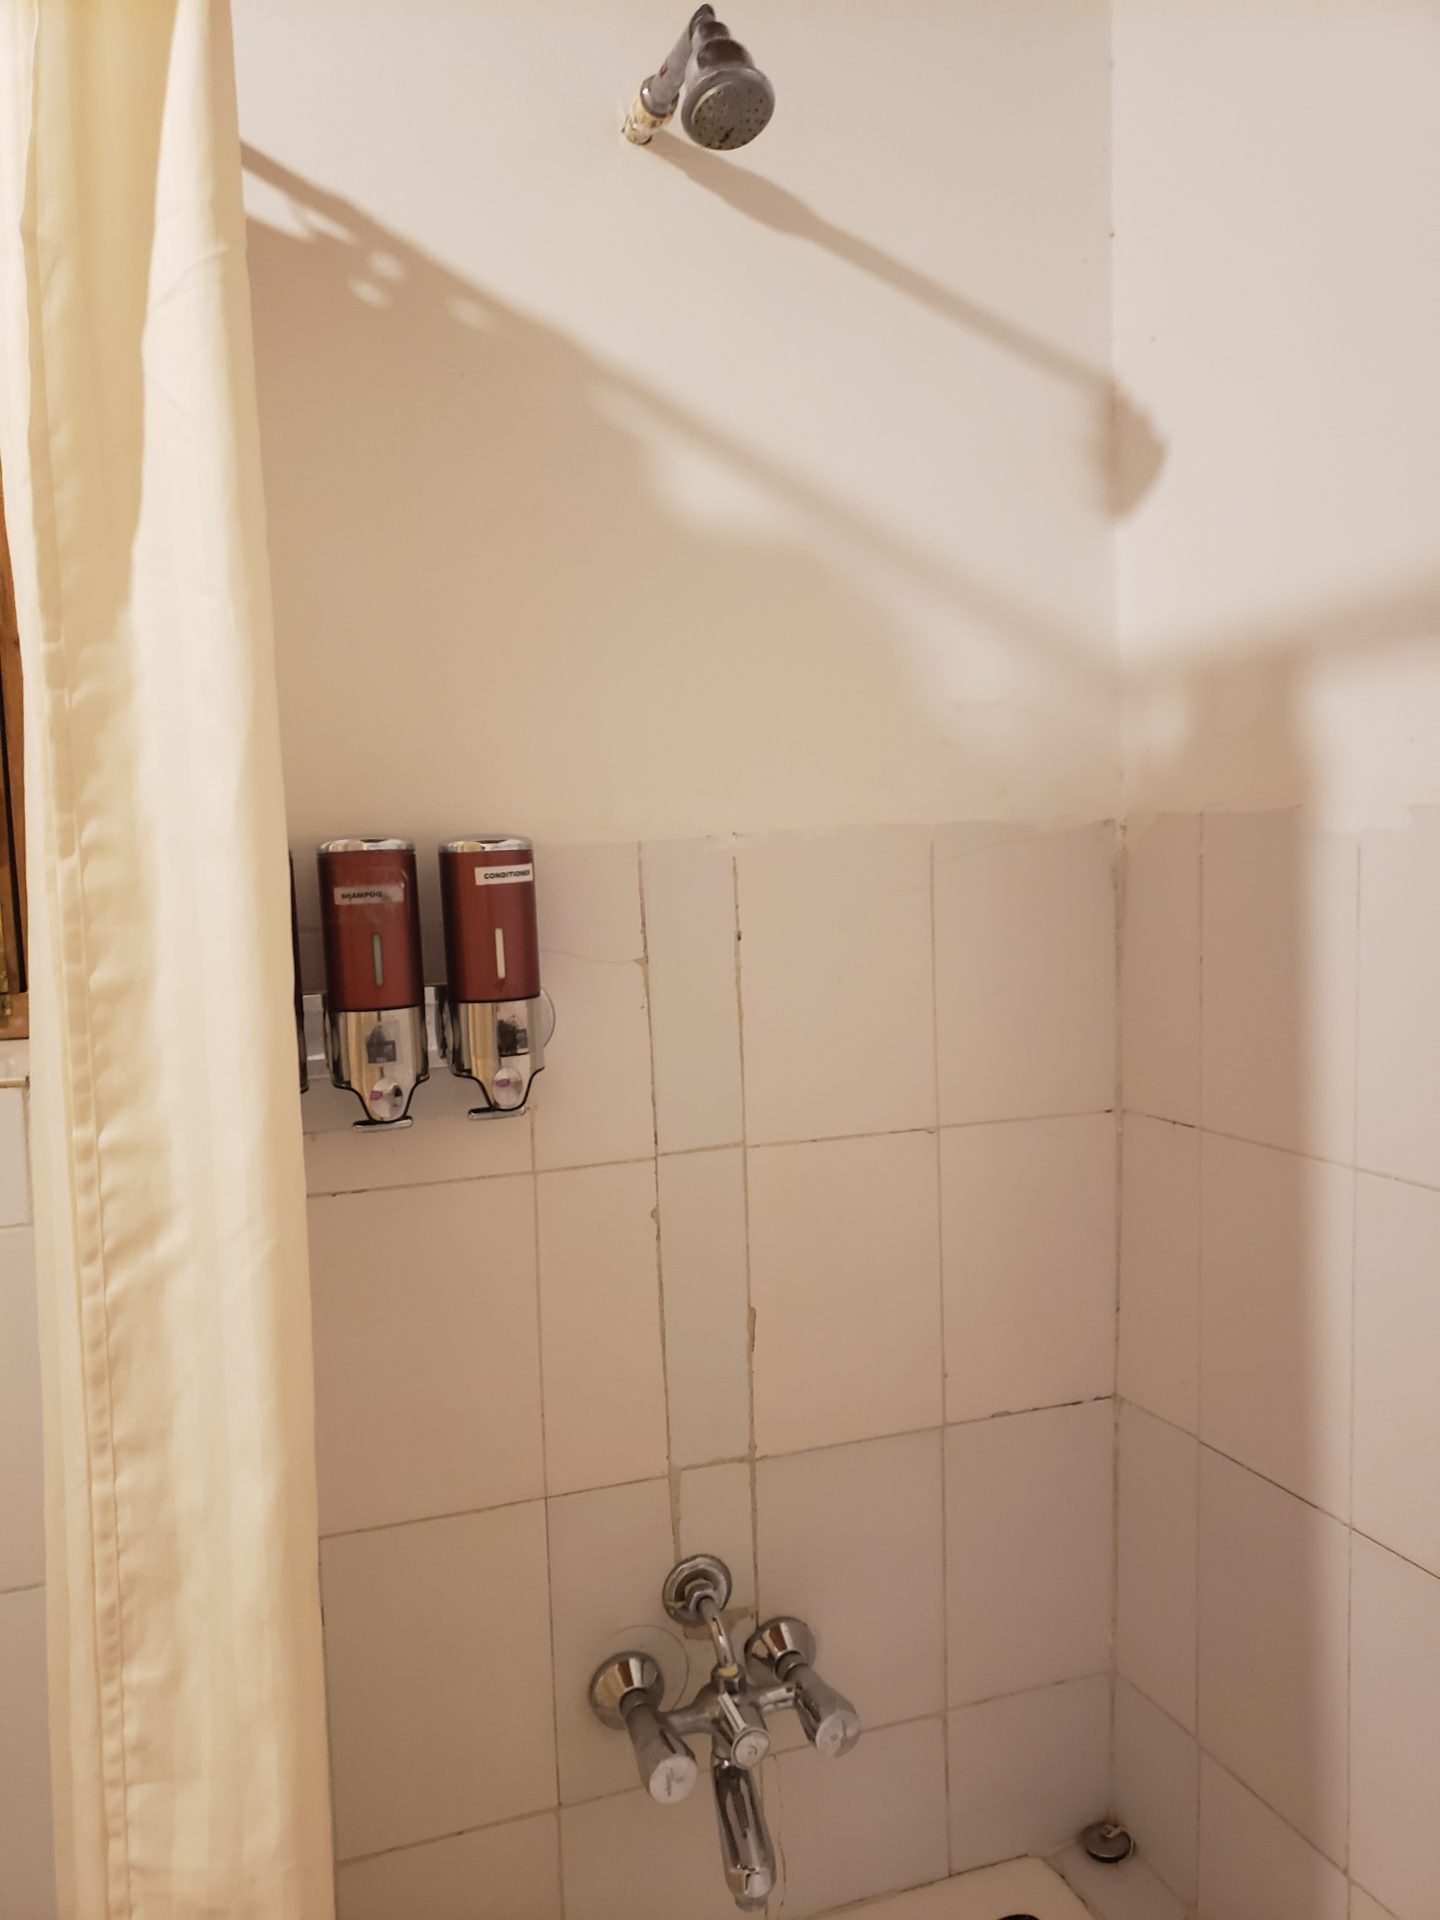 a shower curtain and soap dispensers on a wall